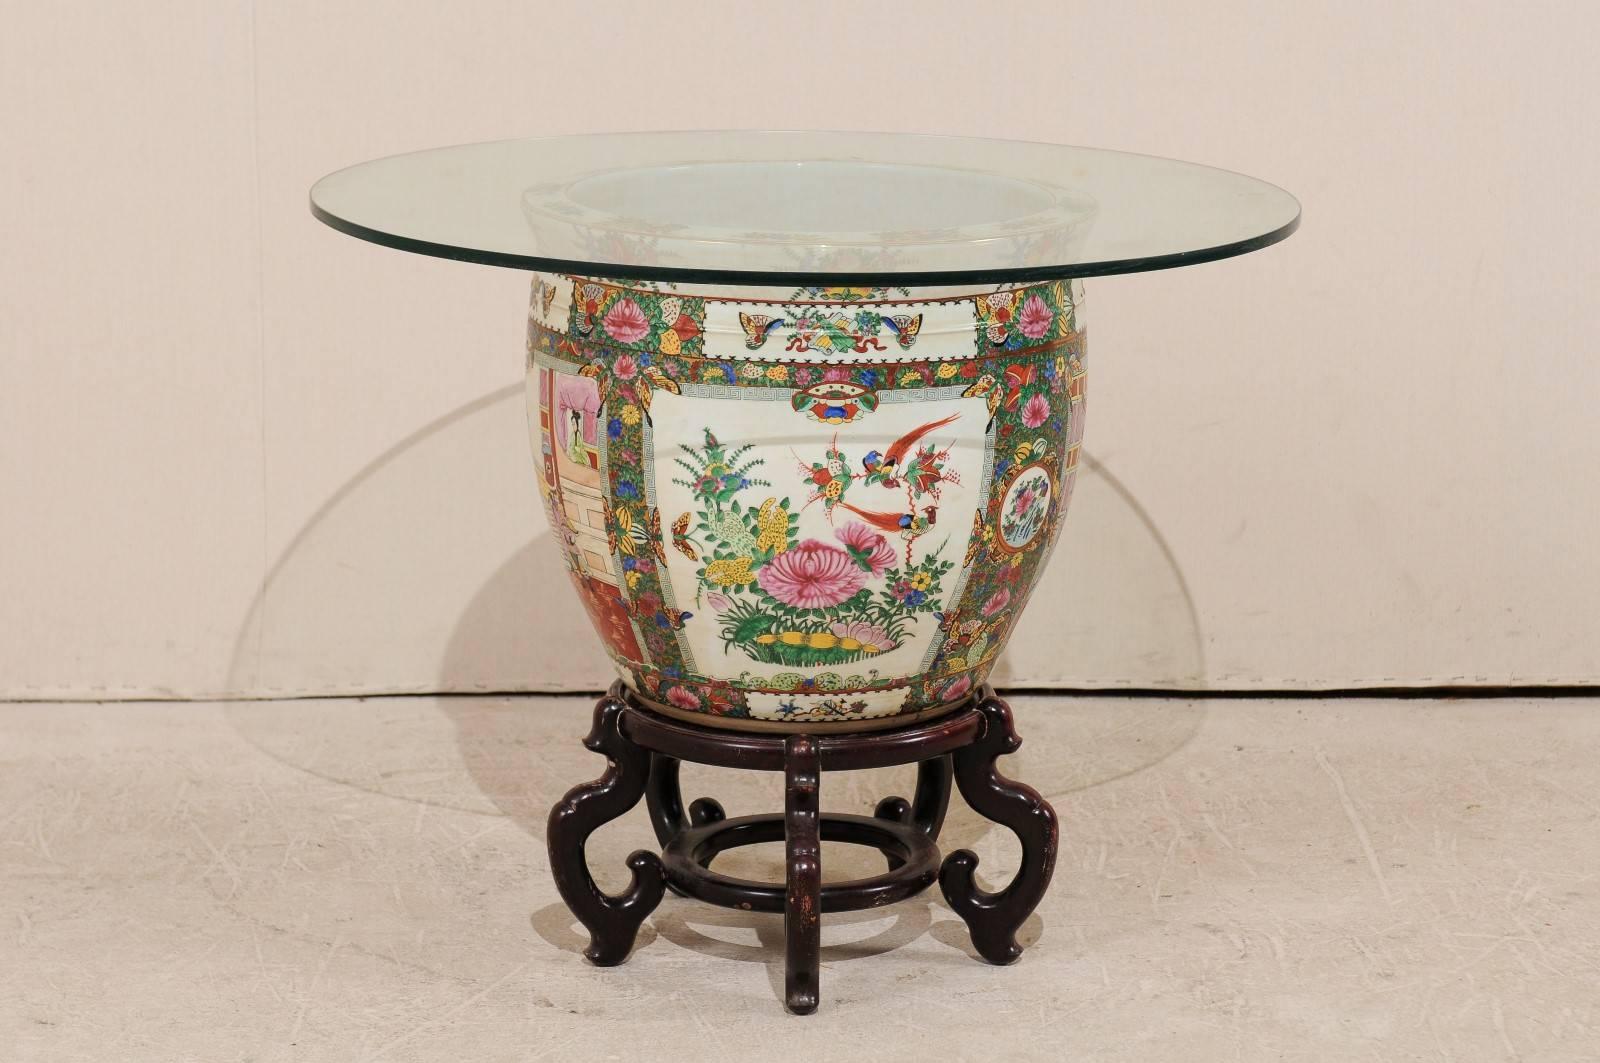 A Chinese Famille rose base and glass top table. This round-shaped Chinese table features a glass top over a large Famille rose porcelain vase. There are beautiful depictions of birds and flowers about the outside of the base with koi and aquatic